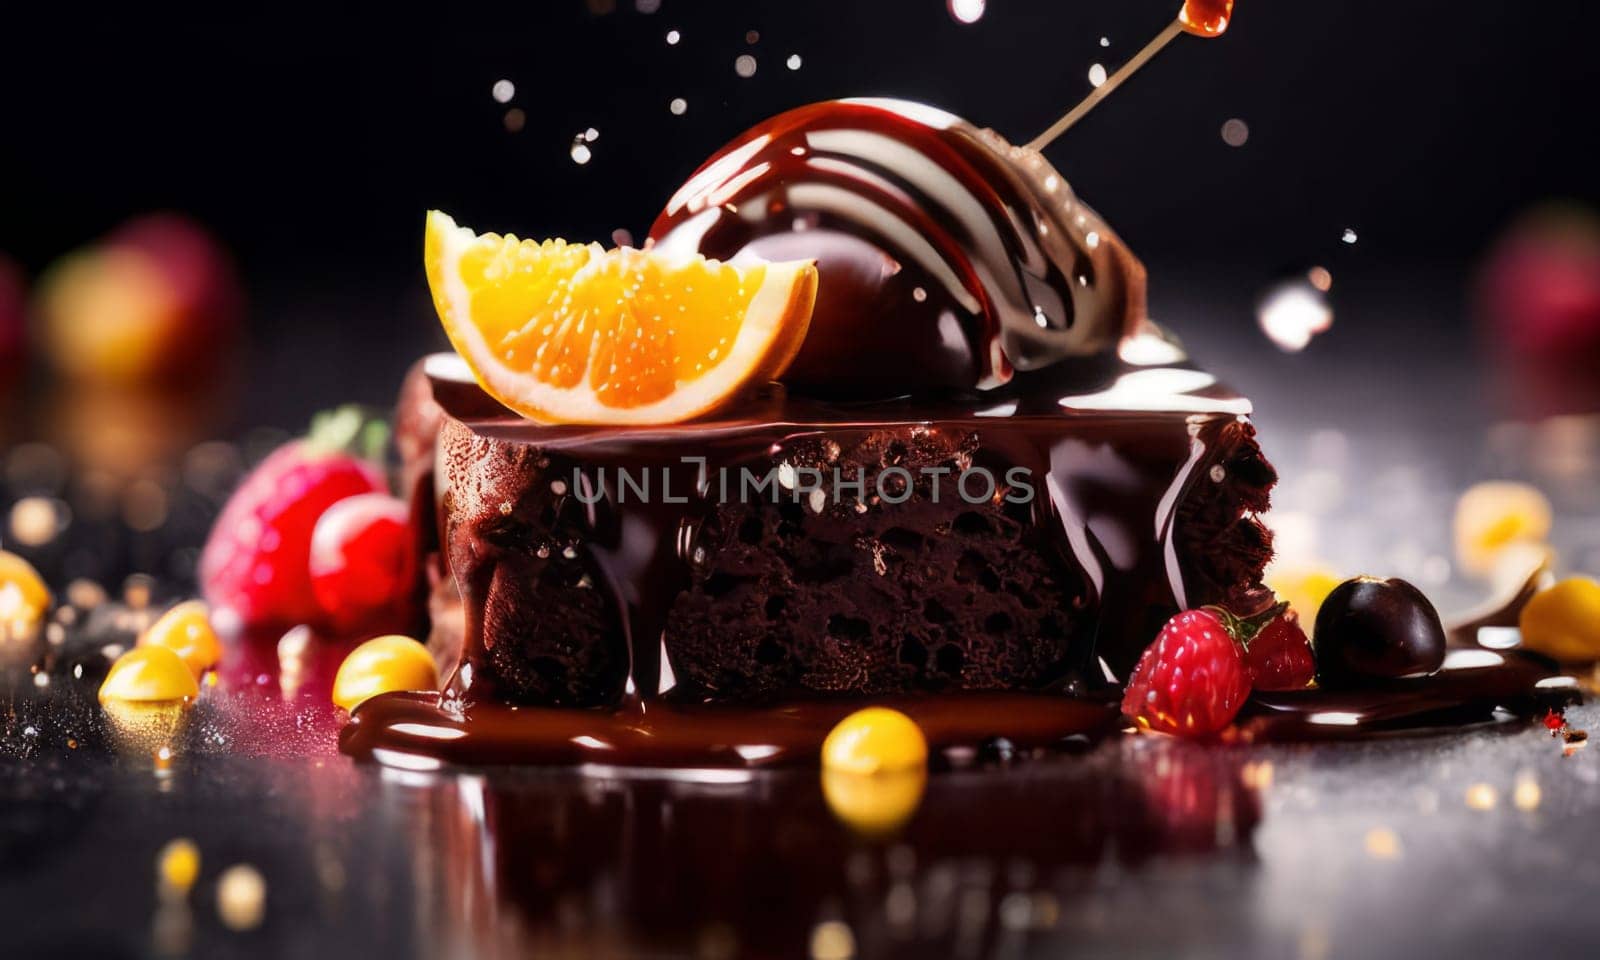 Delicious piece of chocolate cake topped with fresh strawberries, raspberries on plate. For cookbooks, food magazine, restaurant, recipe websites, social media sites, festive events, wedding, birthday